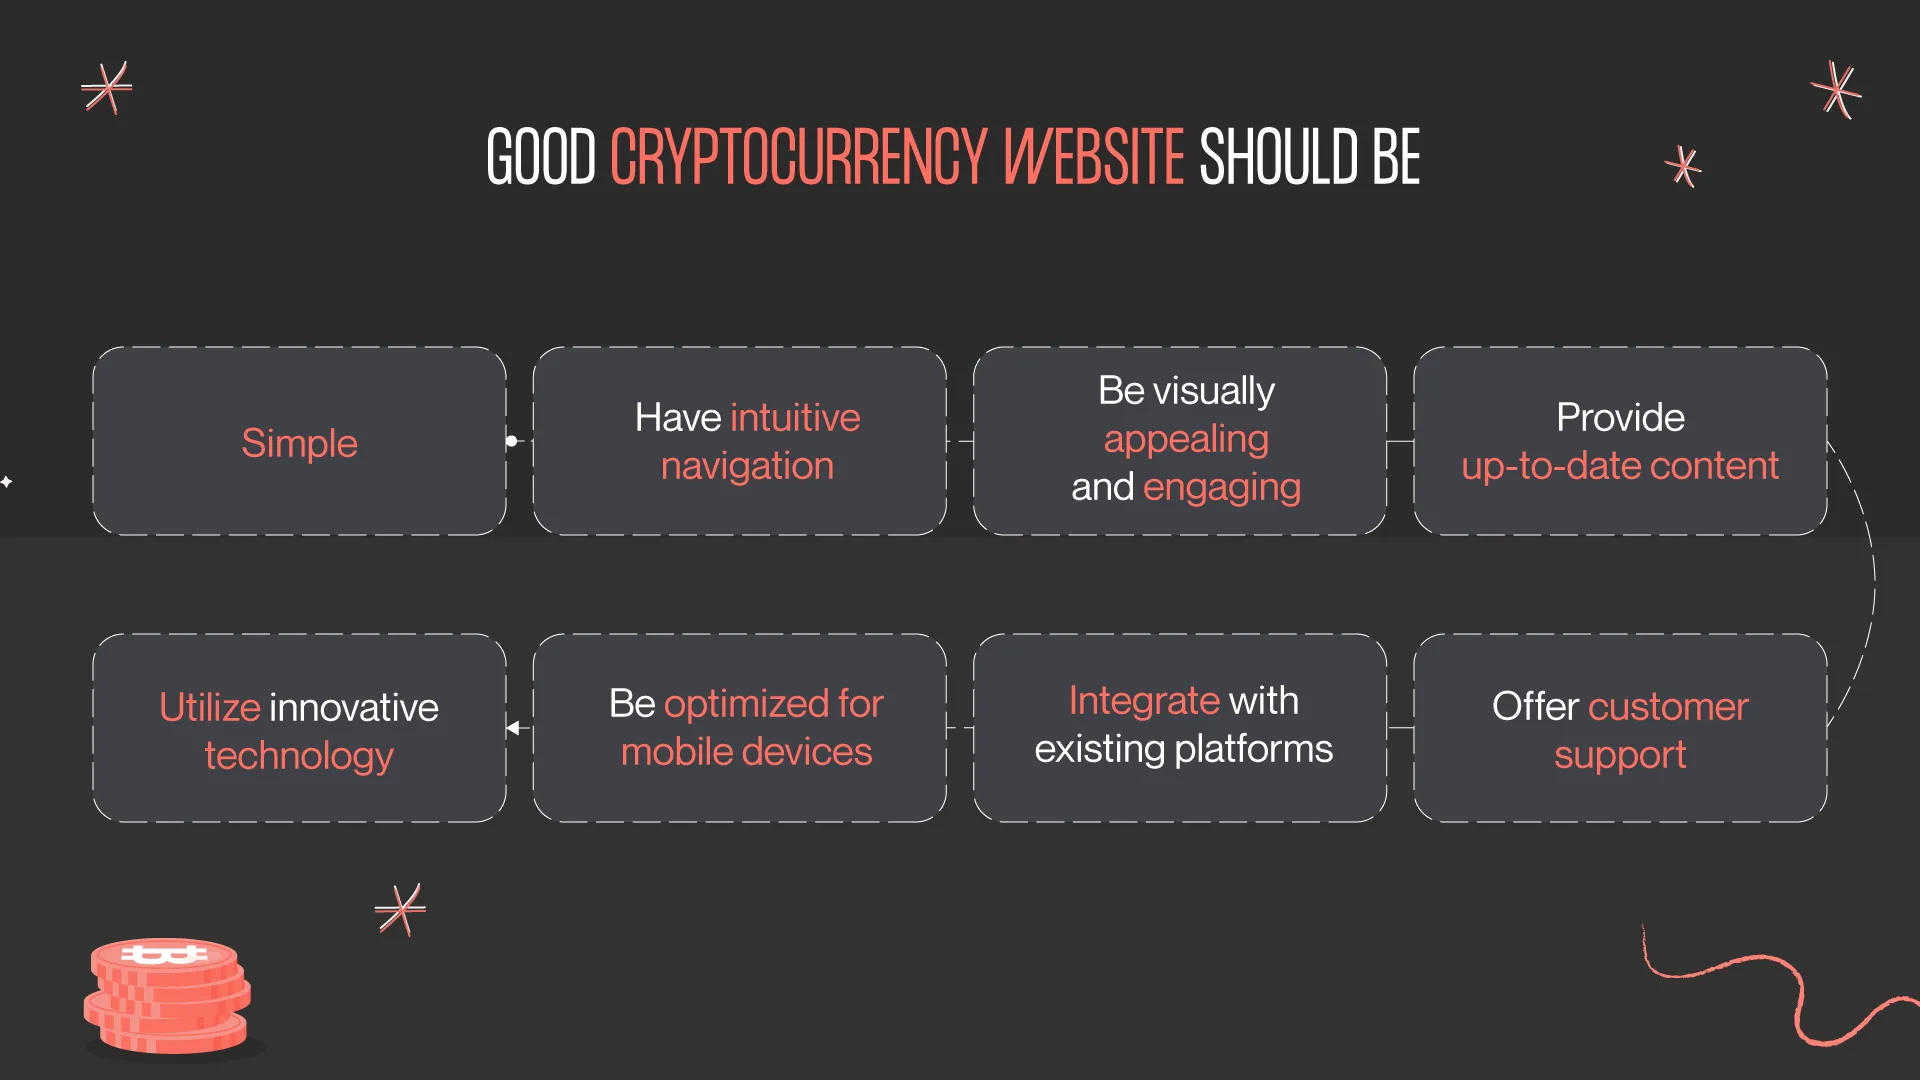 what should good cryptocurrency website design do